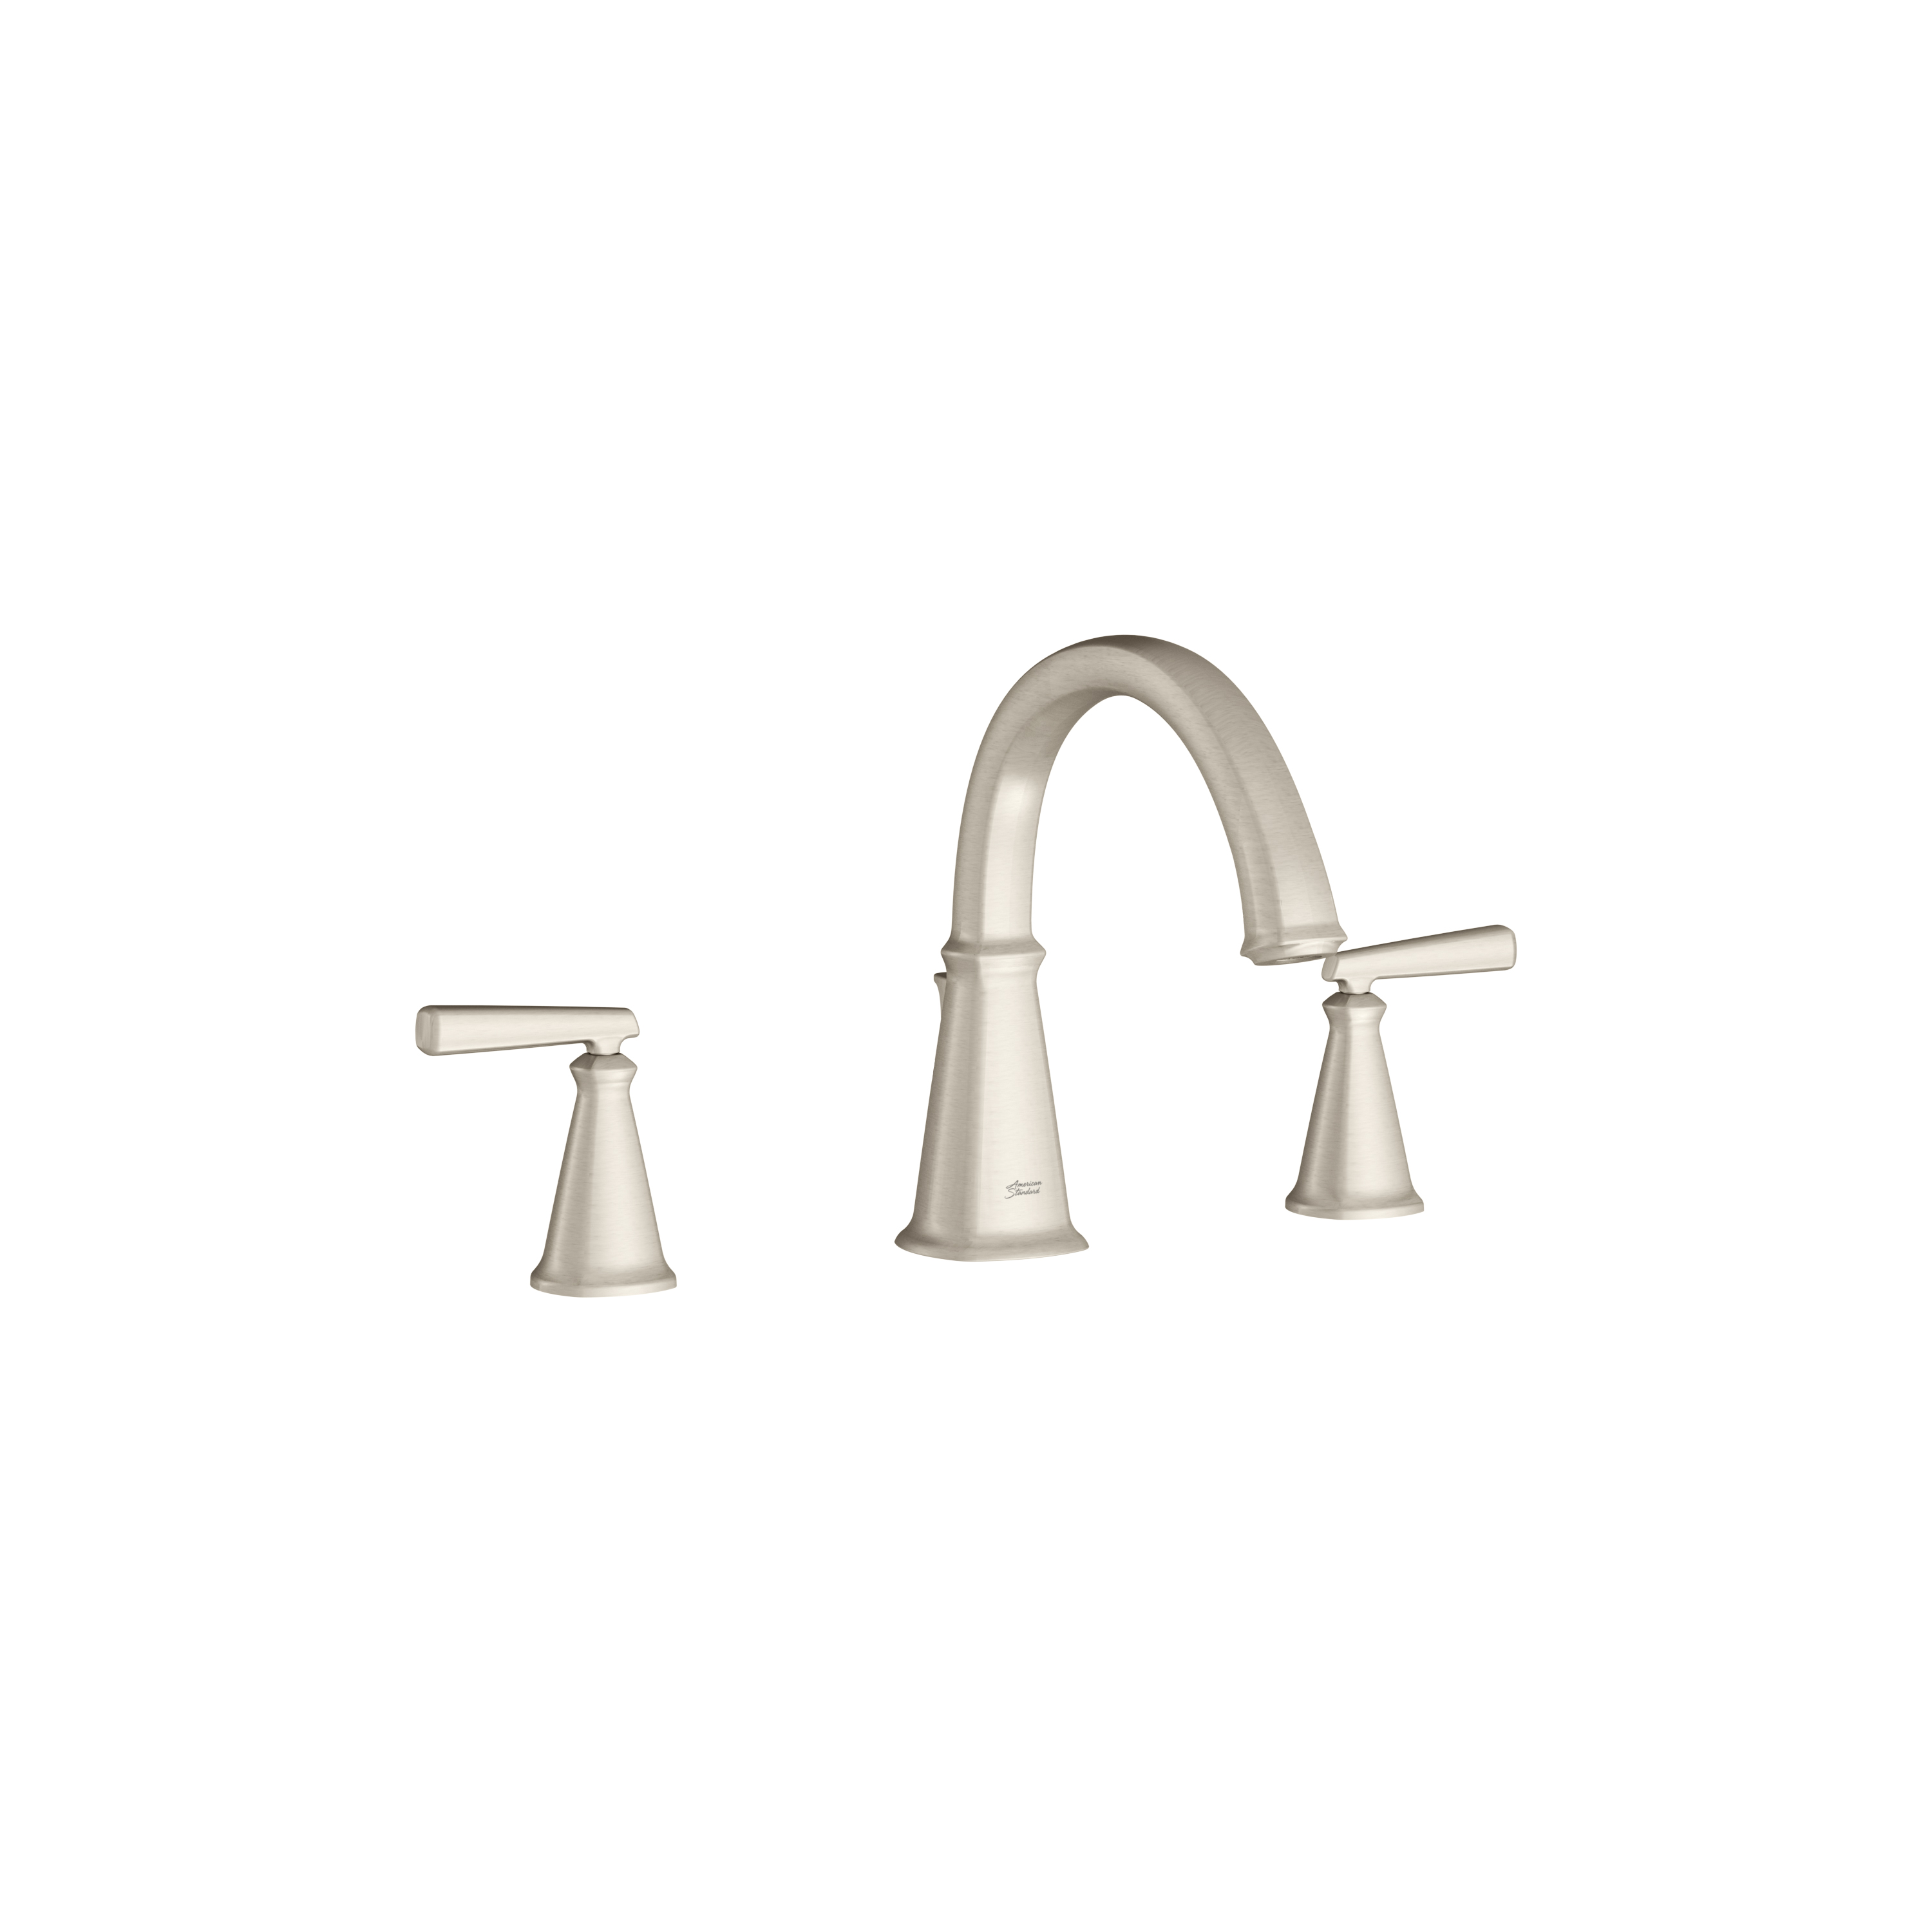 Edgemere® Bathtub Faucet With Lever Handles for Flash® Rough-In Valve